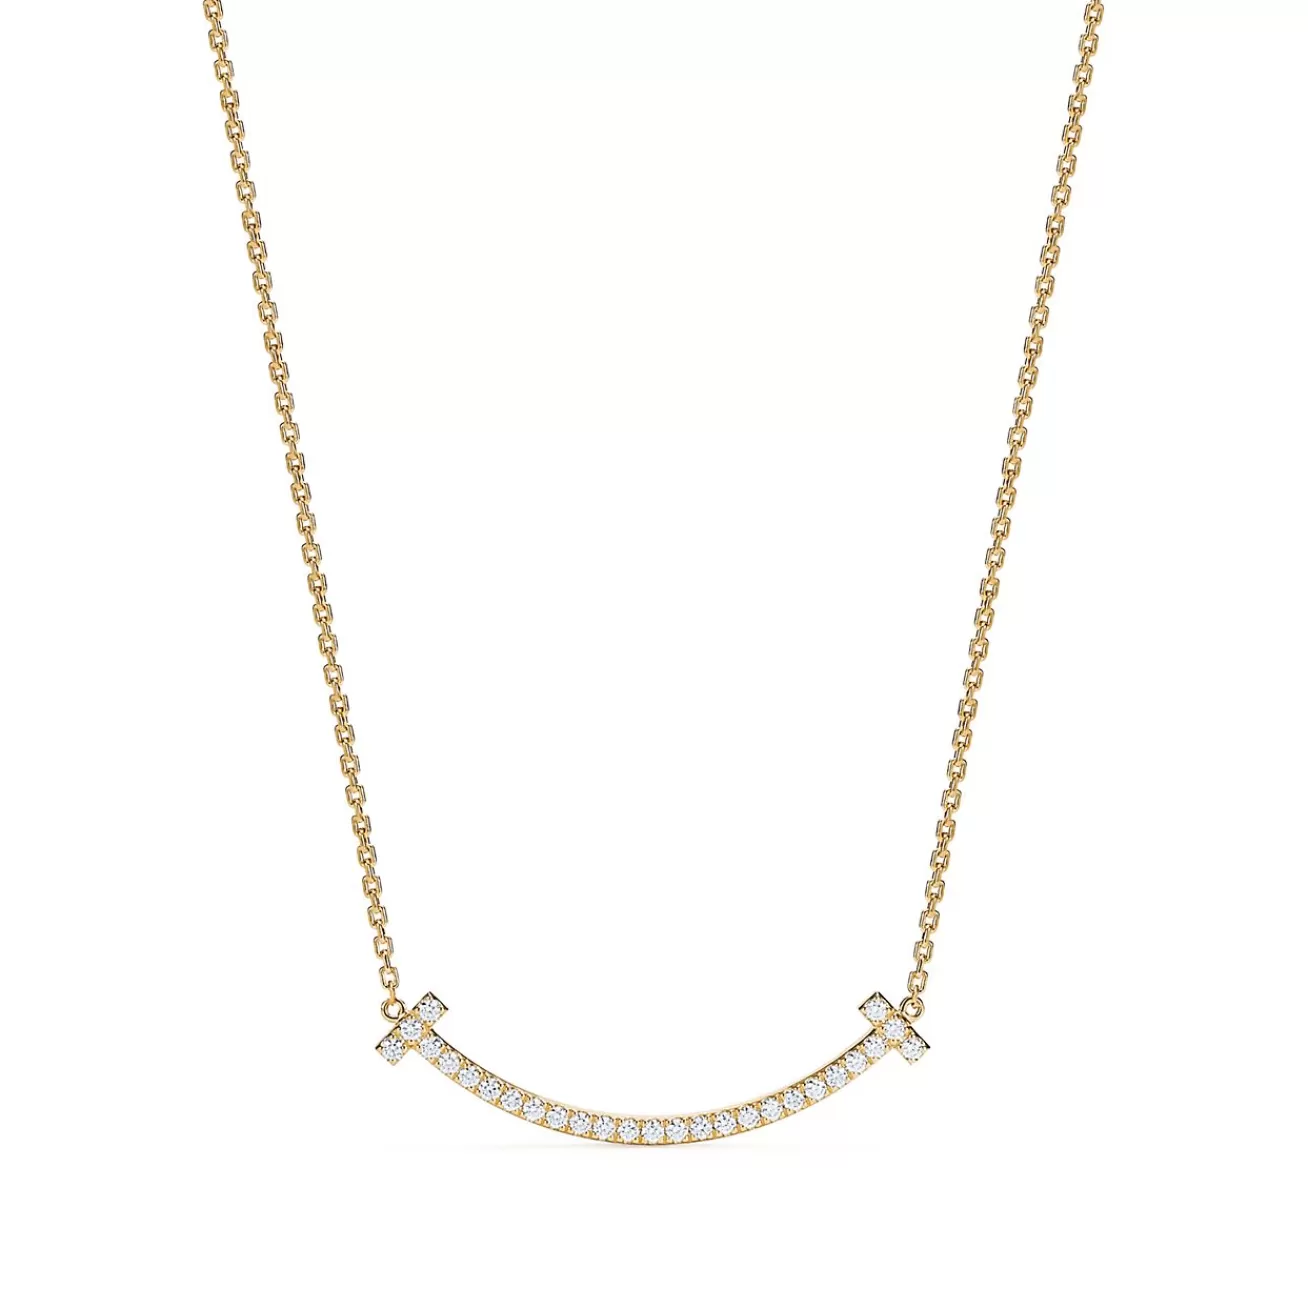 Tiffany & Co. Tiffany T medium smile pendant in 18k gold with diamonds. | ^ Necklaces & Pendants | Gold Jewelry